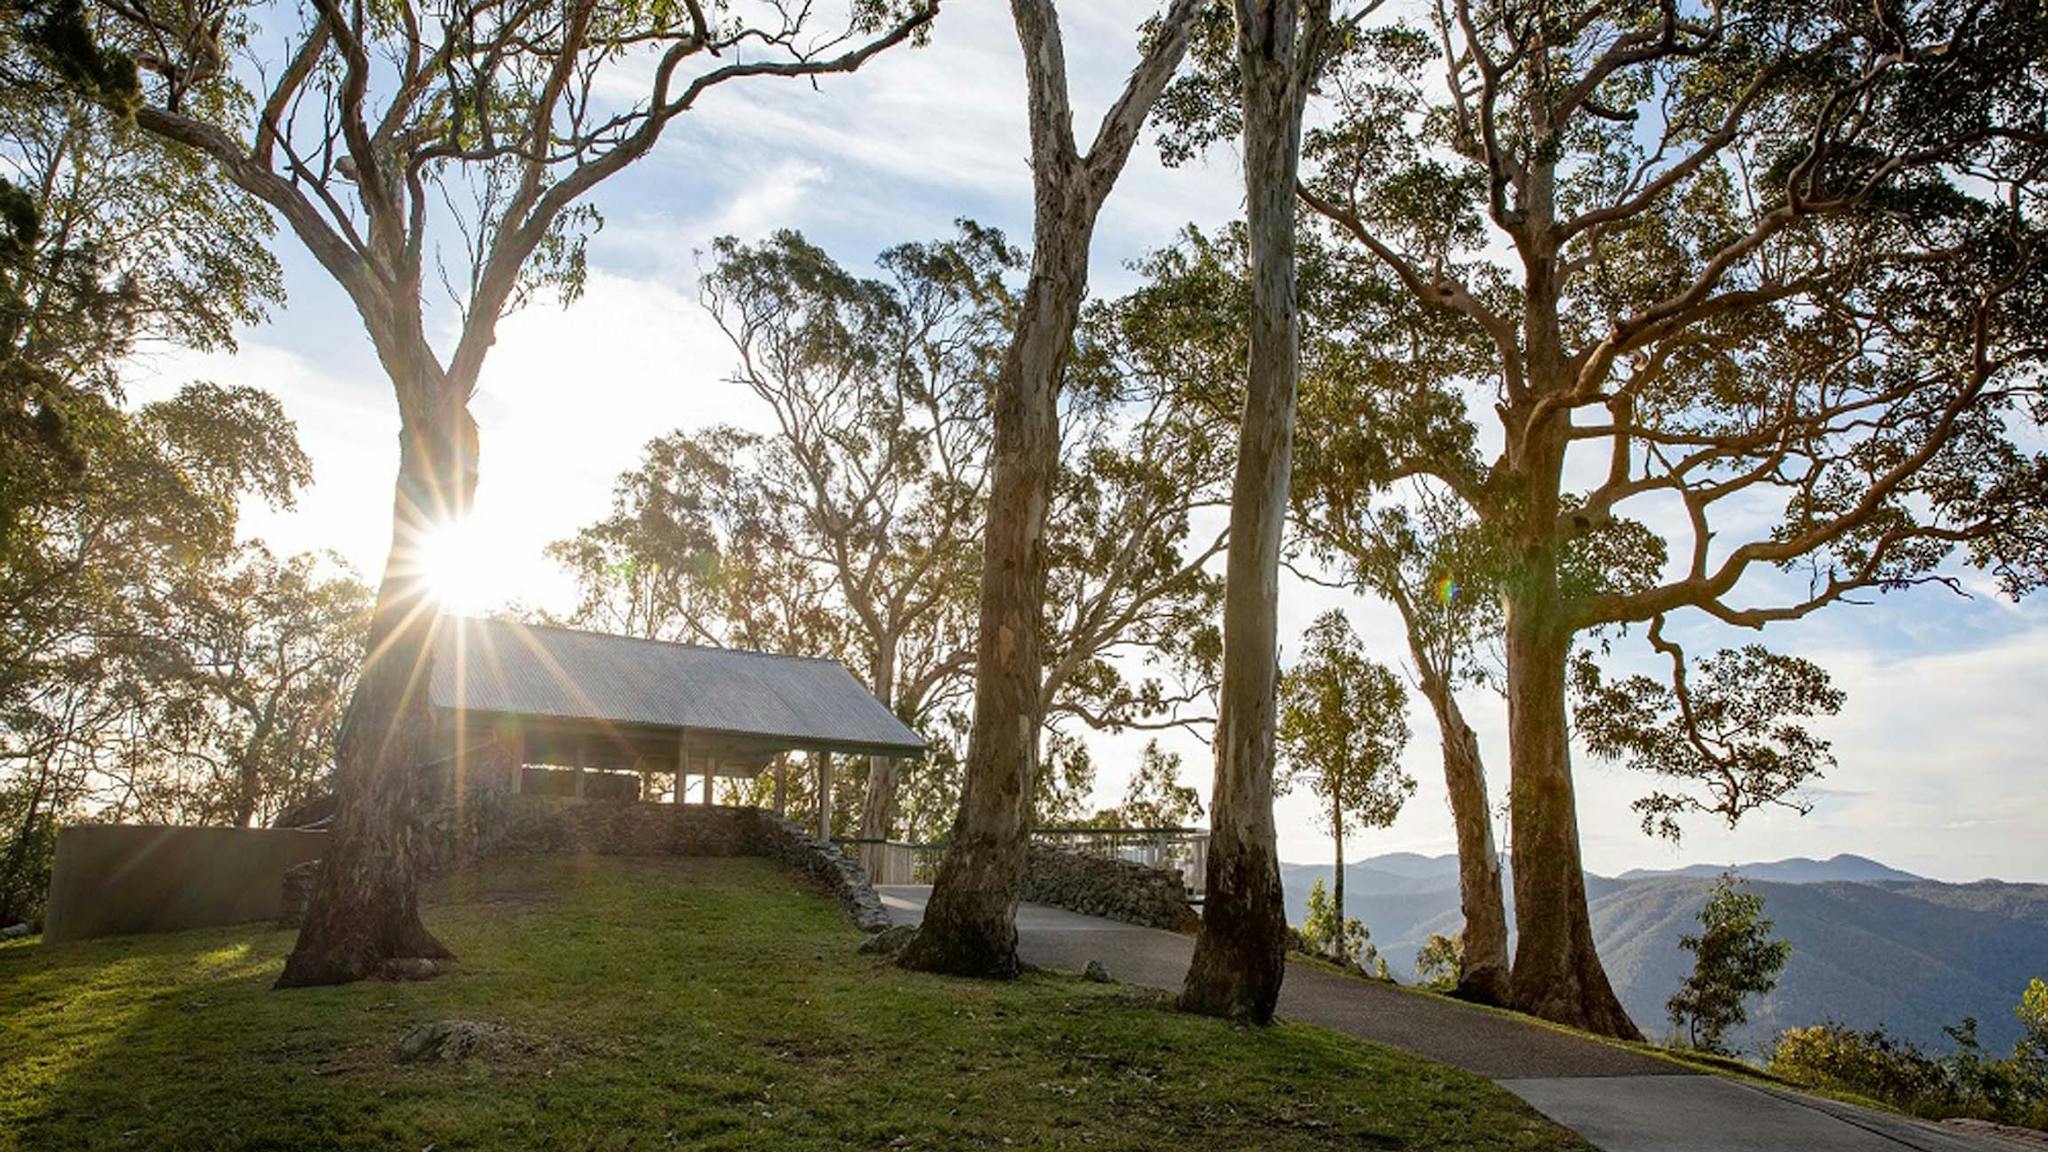 Picnic hut surrounded by trees at Jolly's lookout during at sunset